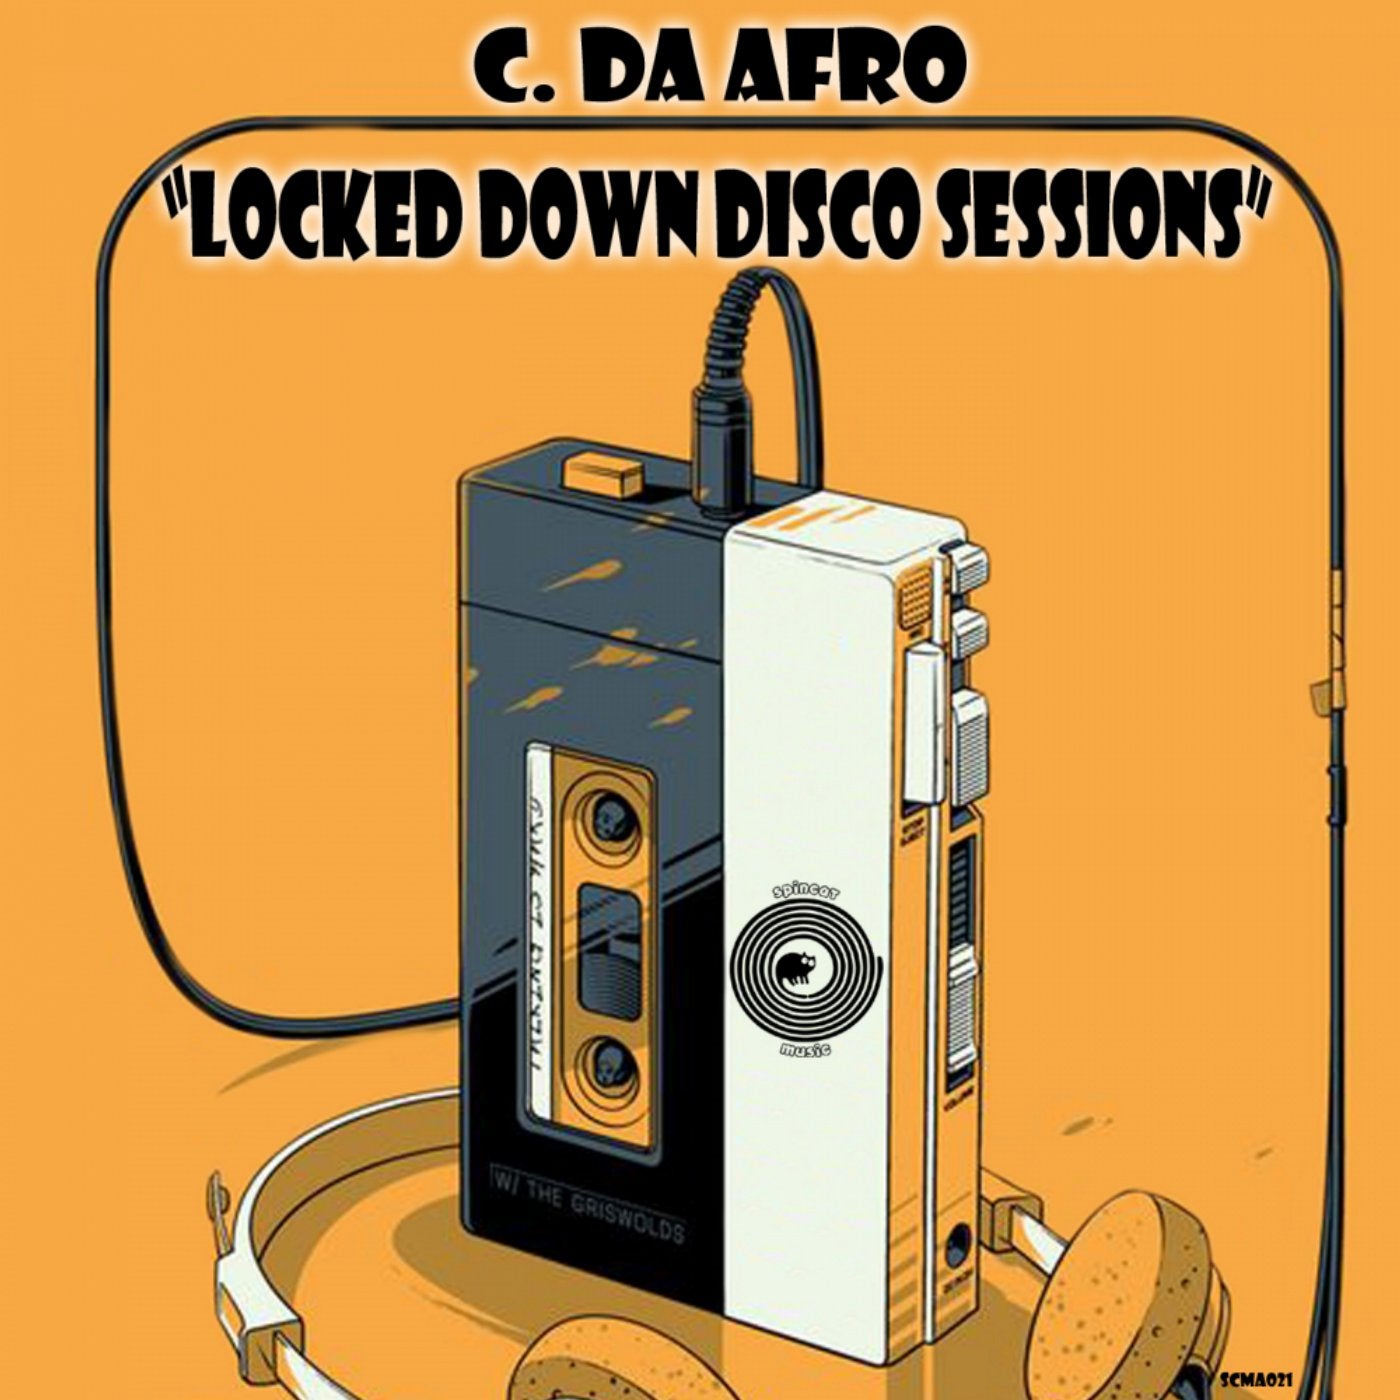 Locked Down Disco Sessions